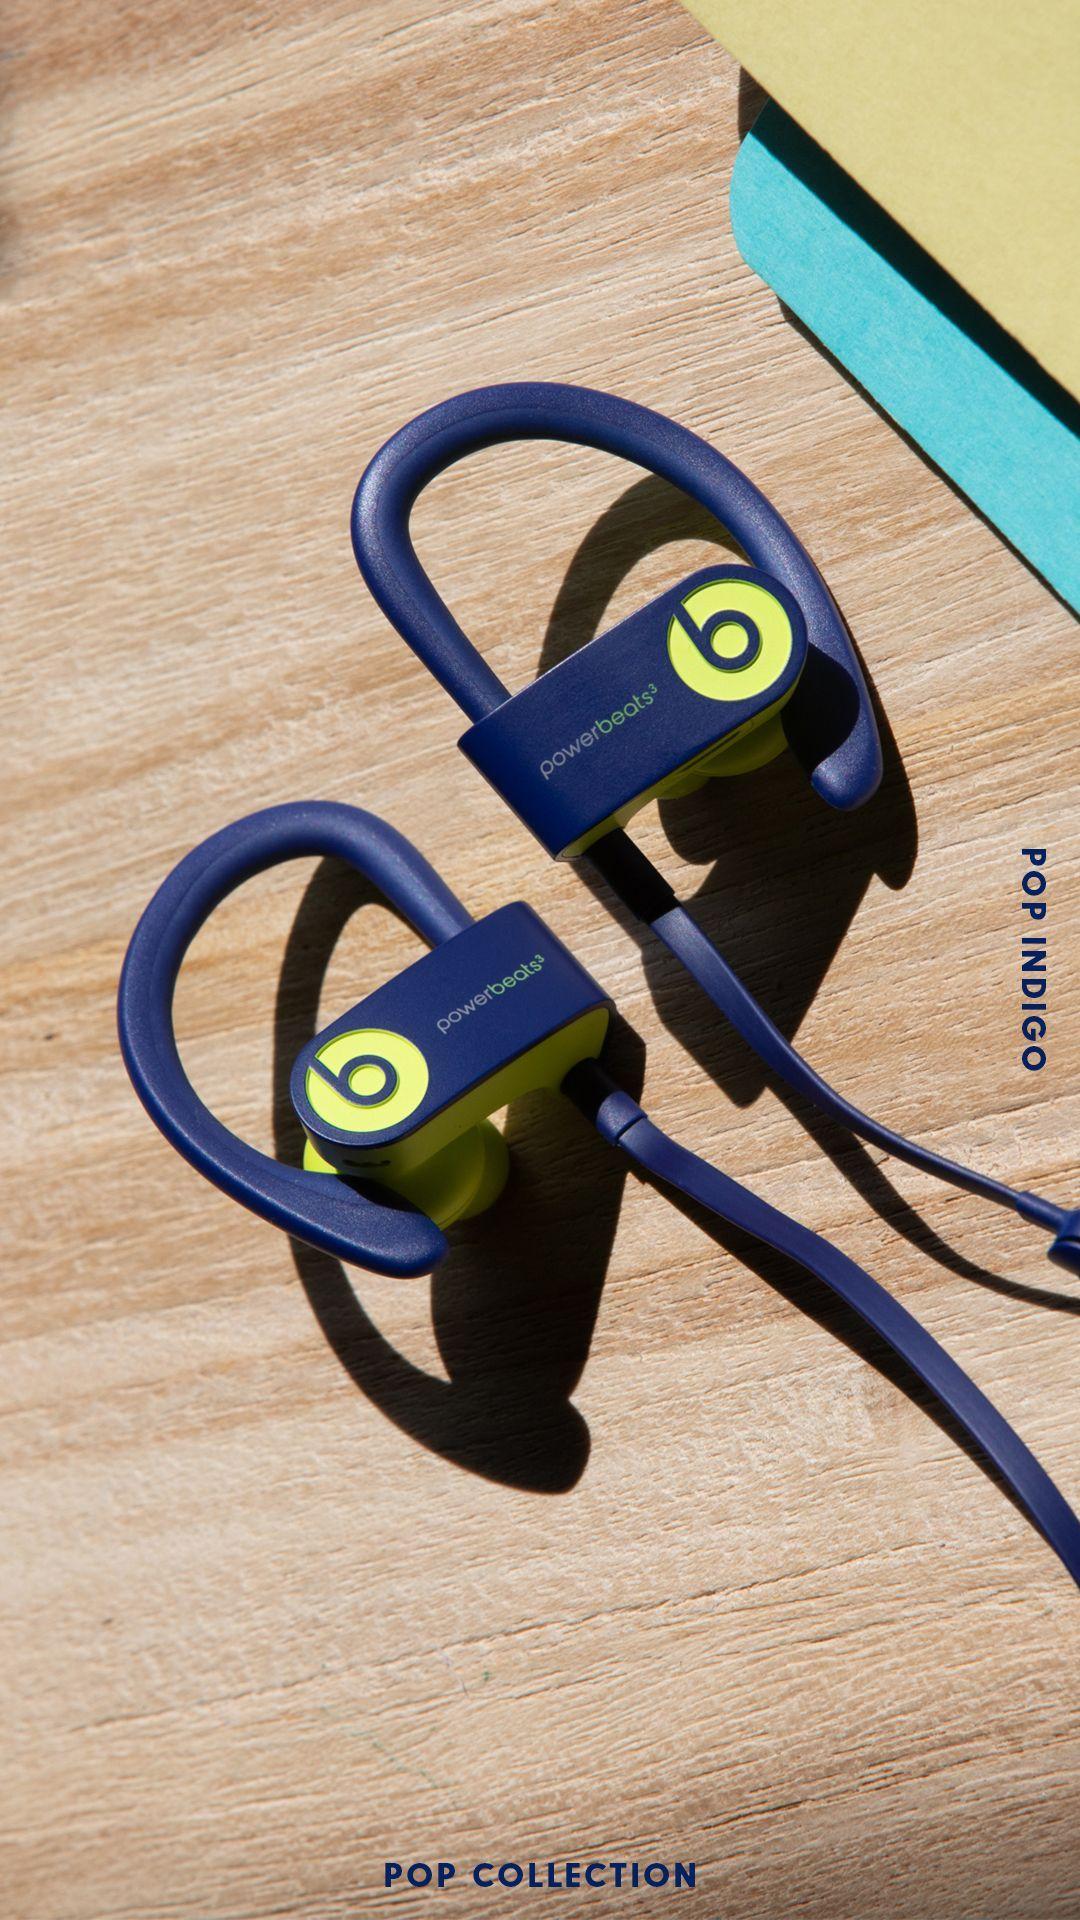 Colored Beats Logo - Refuse to blend in. Shop the Beats Pop Collection. Upgrade your